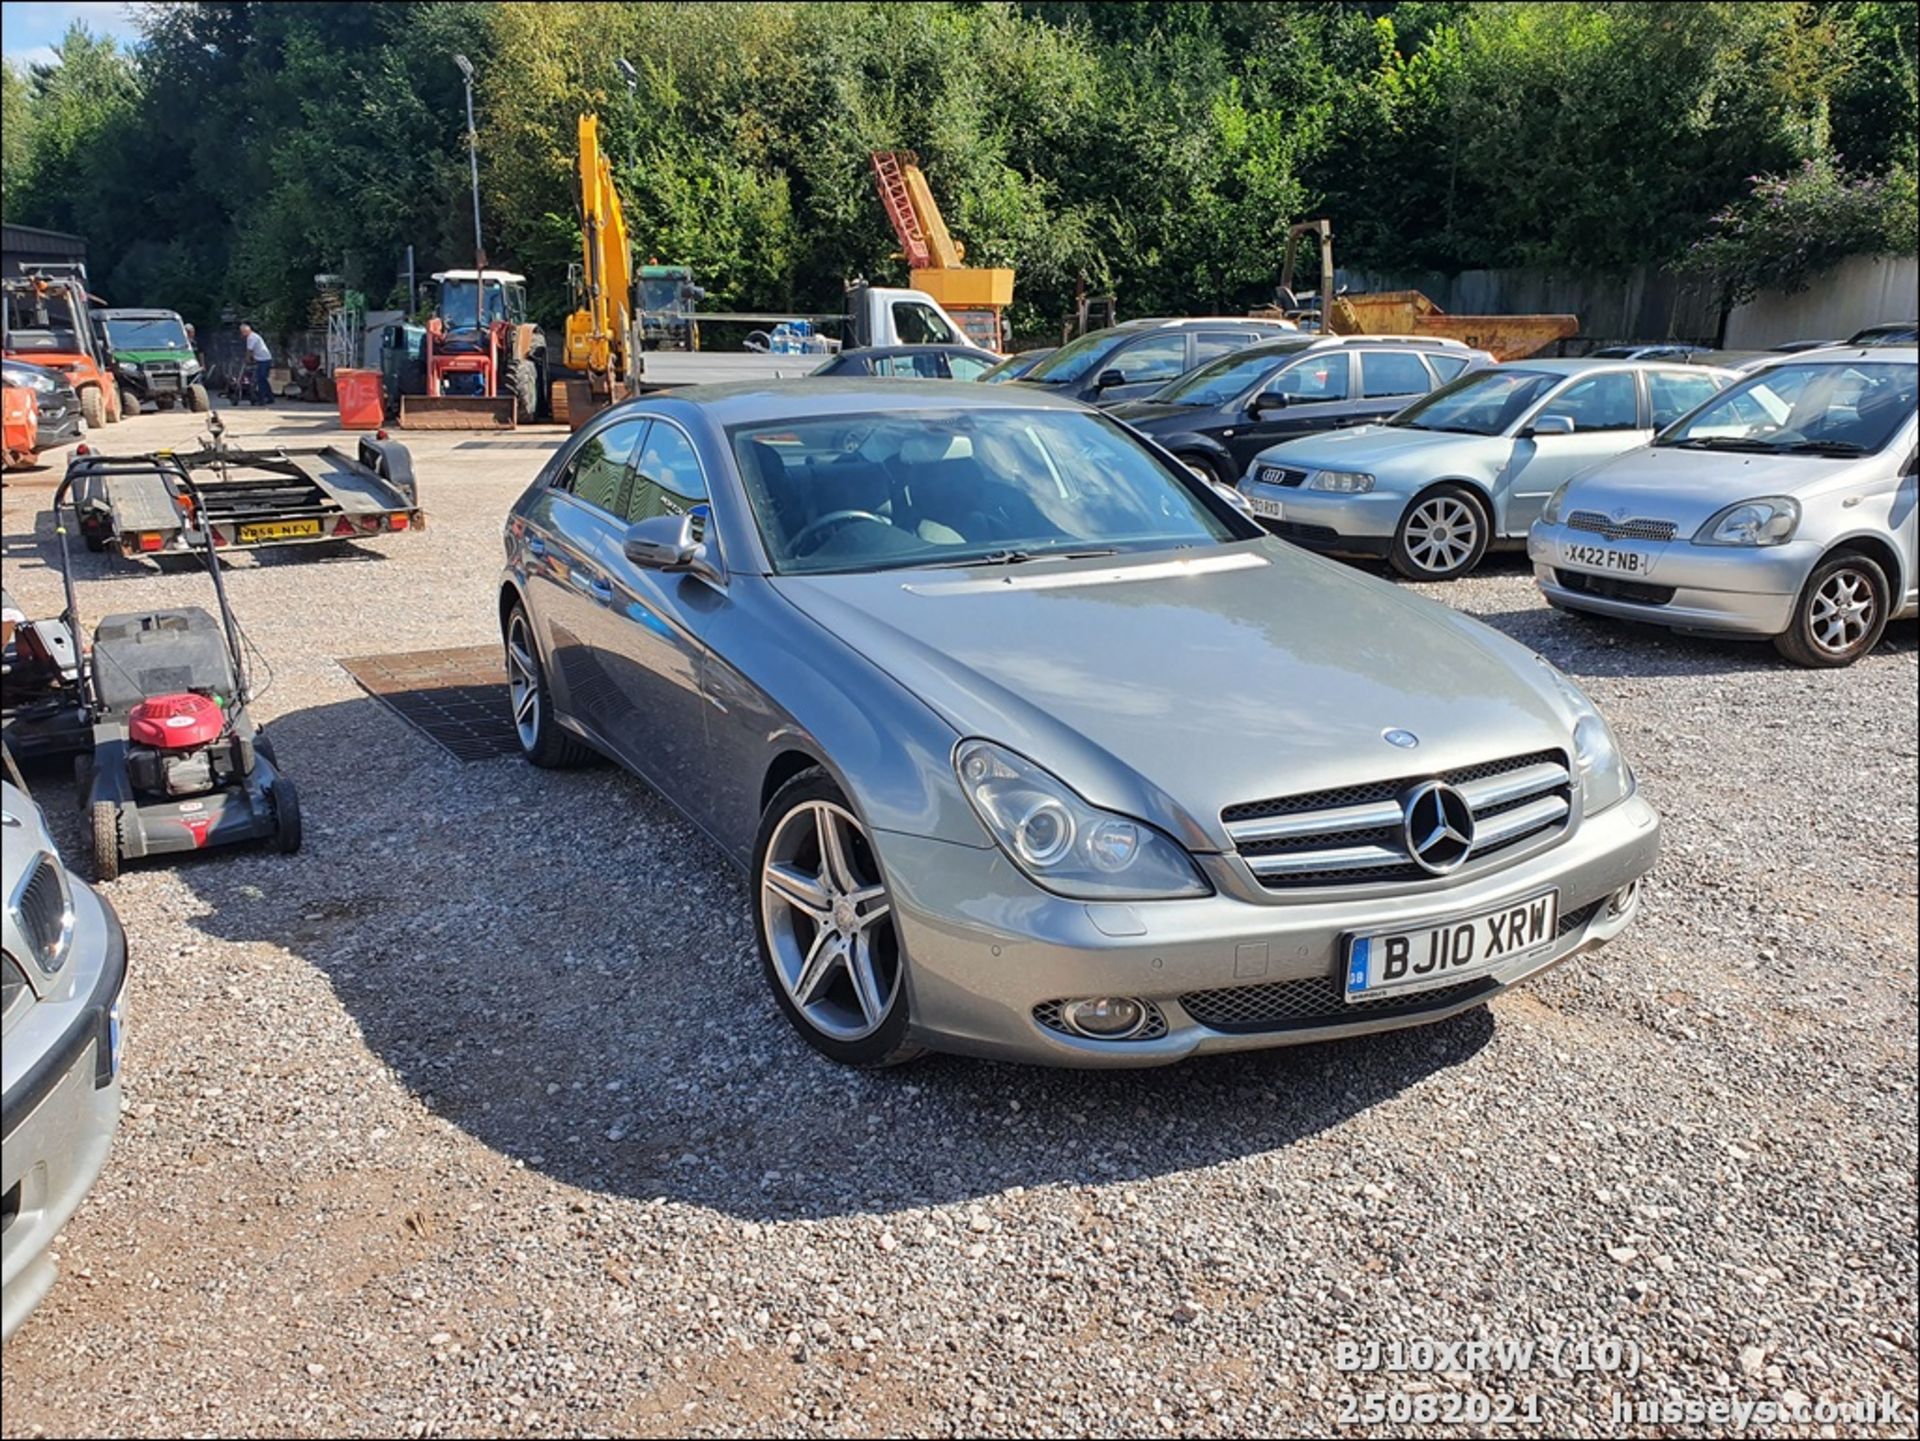 10/10 MERCEDES-BENZ CLS350 GRAND EDIT-N CDI A - 2987cc 2dr Coupe (Silver) - Image 11 of 18